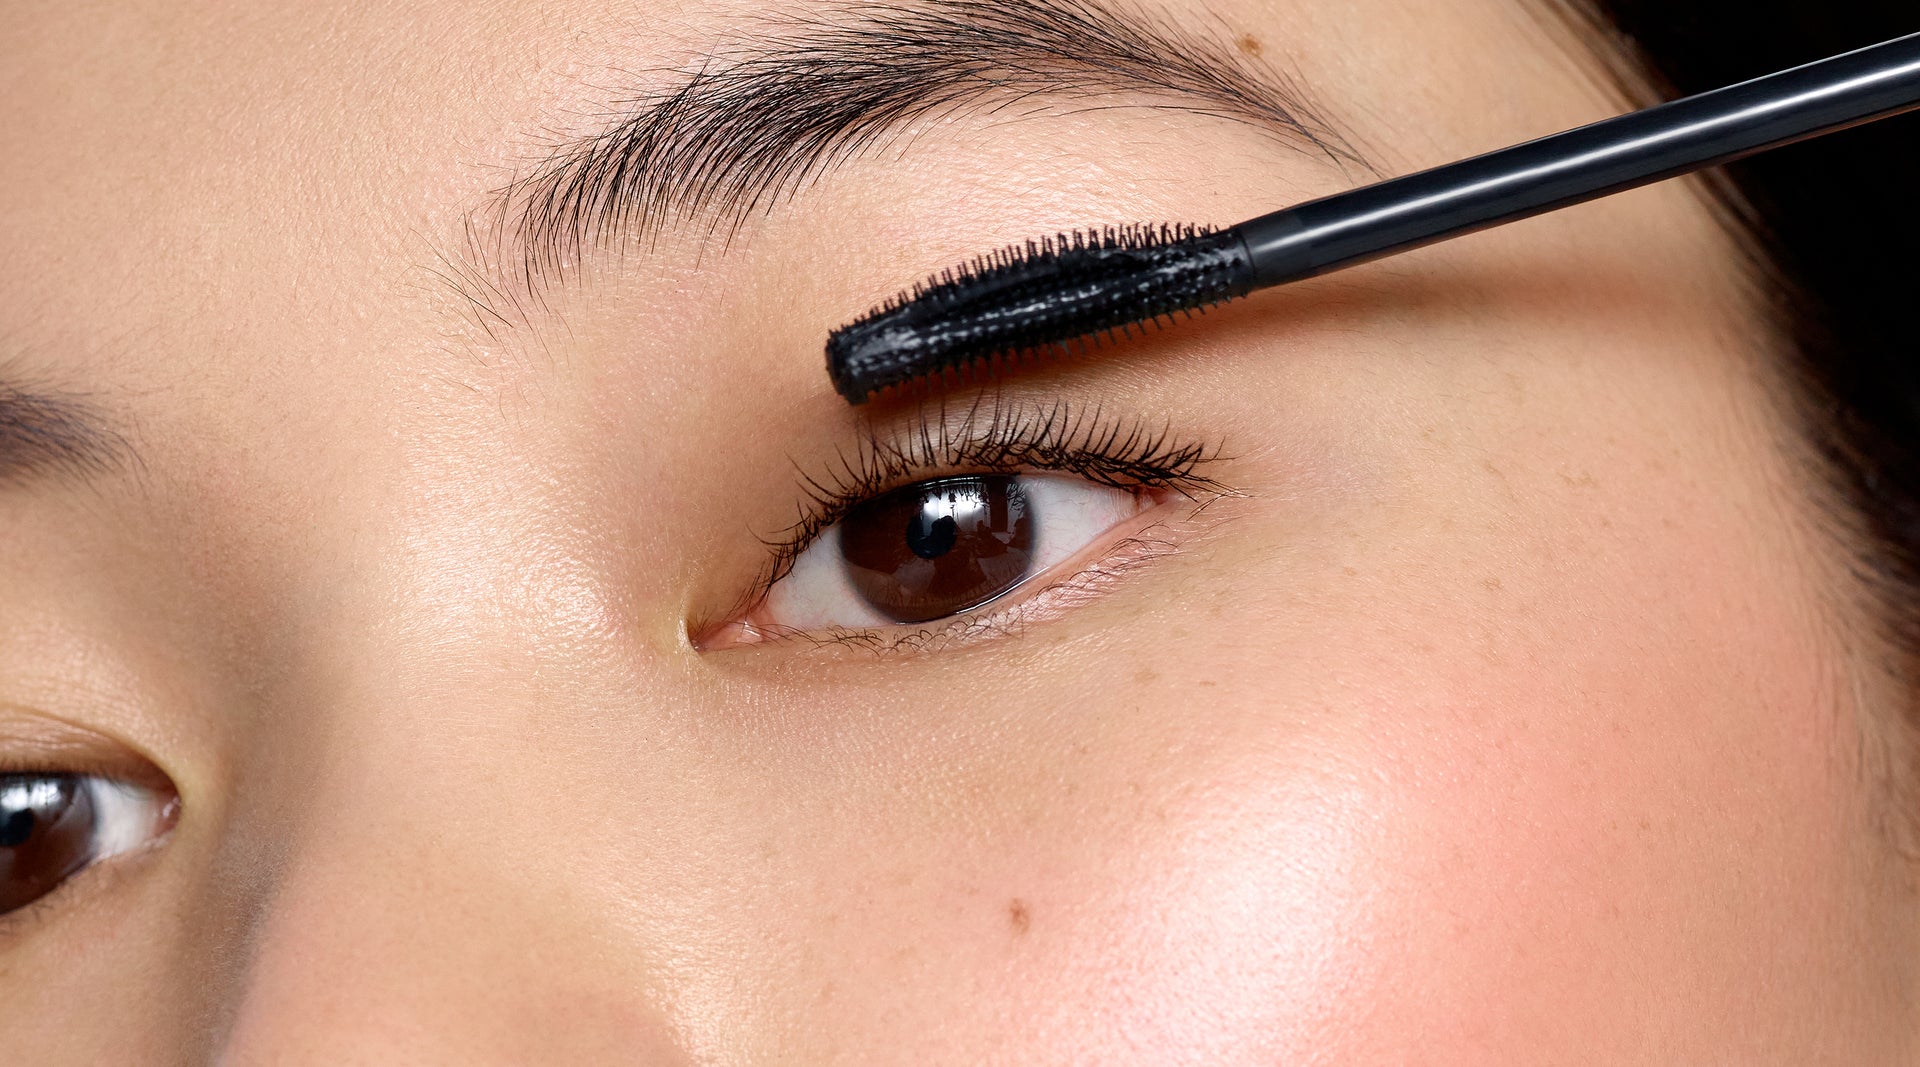 Pro Tips for Keeping Your Eyelashes Curled